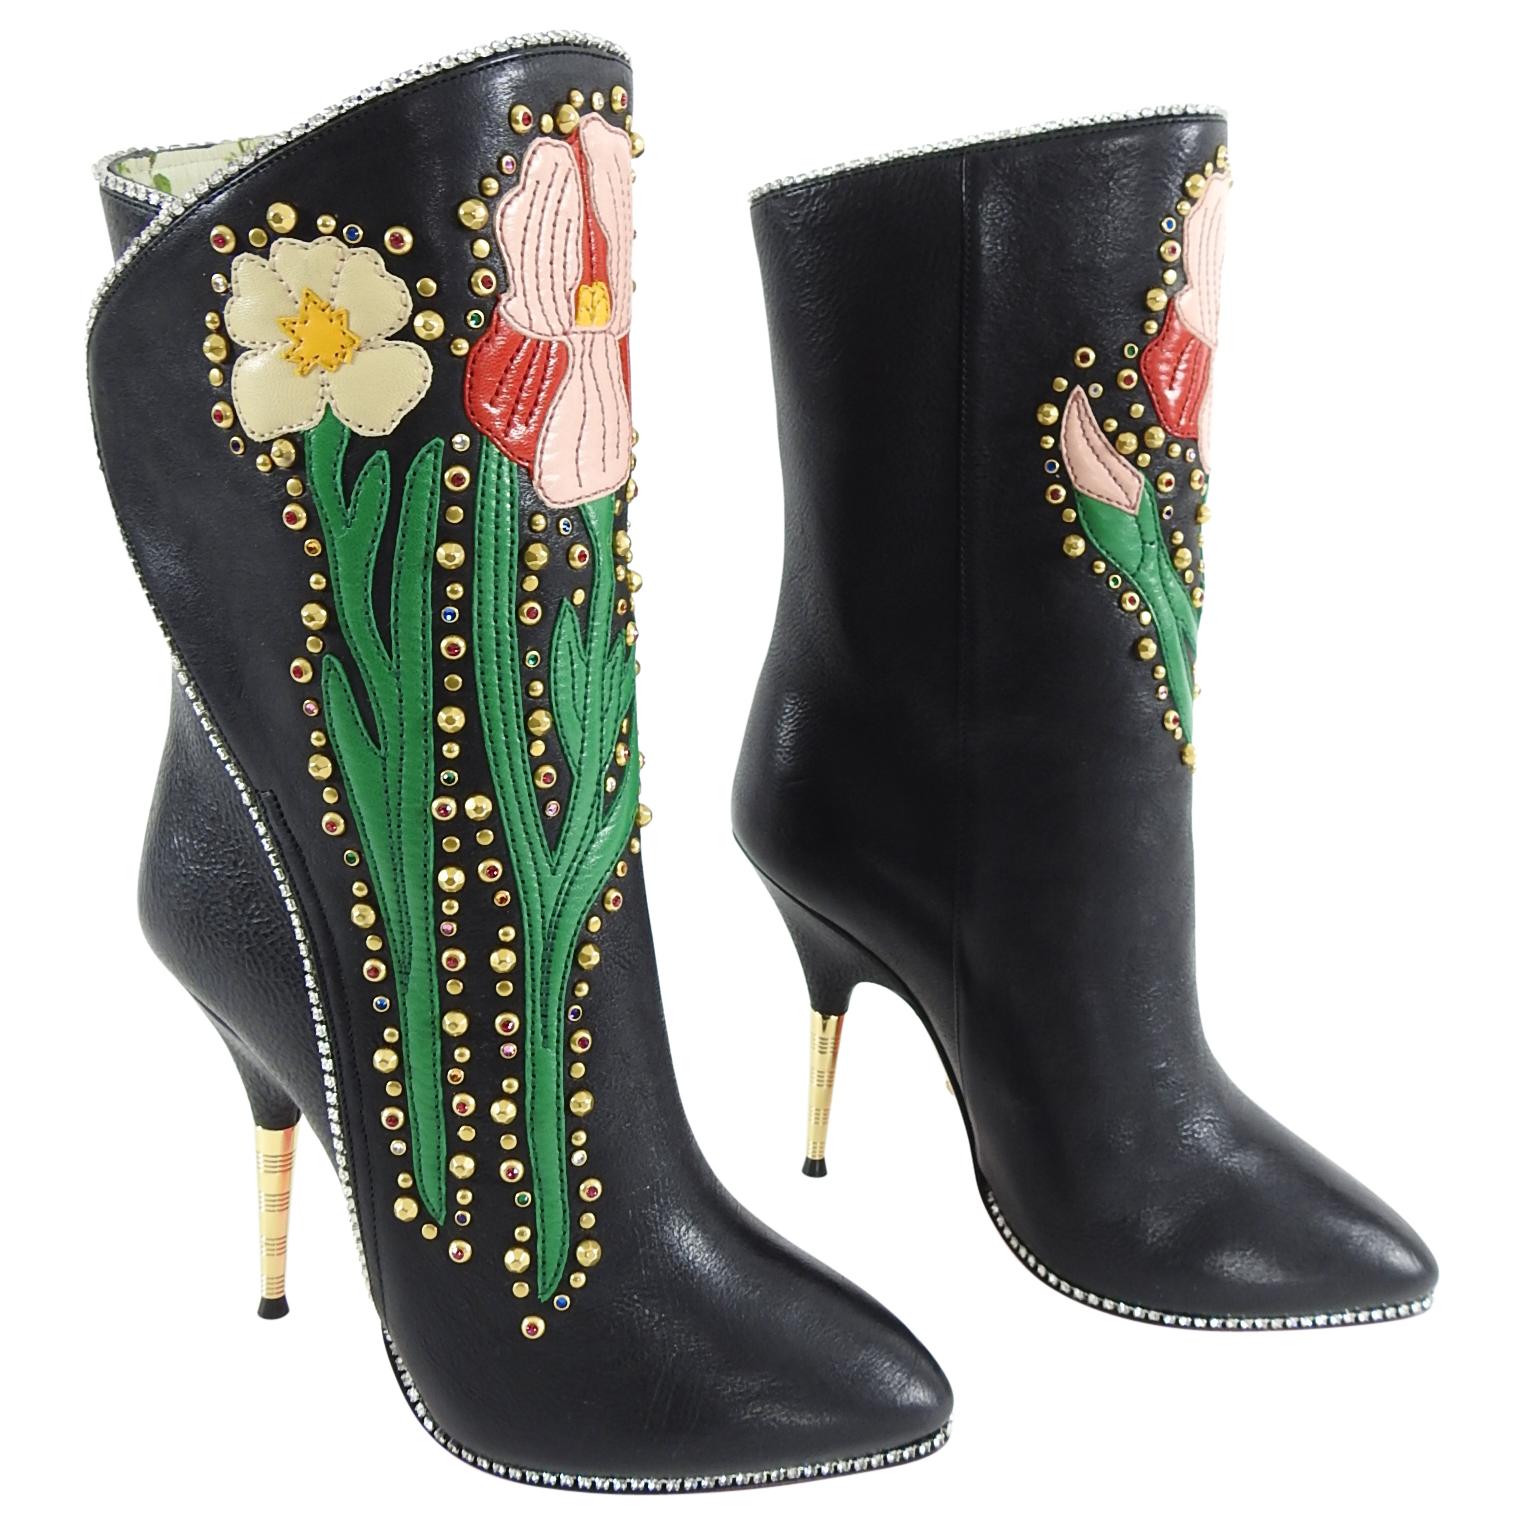 Gucci Fall 2017 Runway Black Crystal Floral Ankle Boots - 5 1